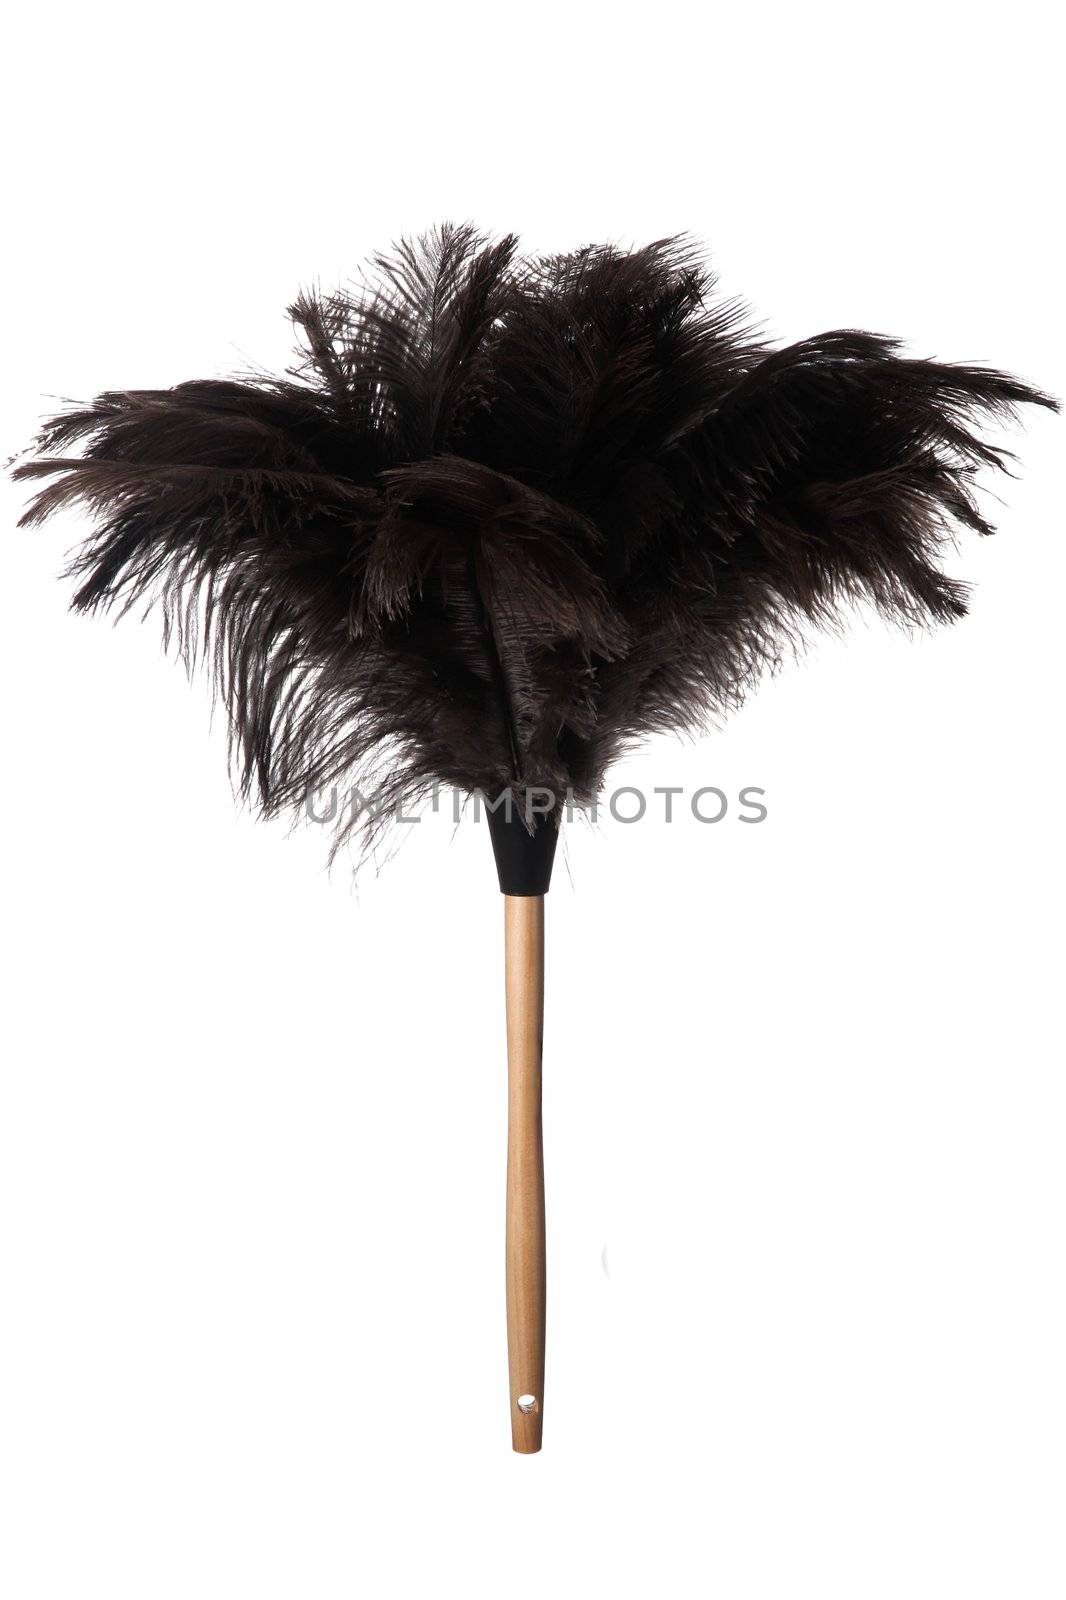 Black ostrich feather duster with wooden handle isolated on white background